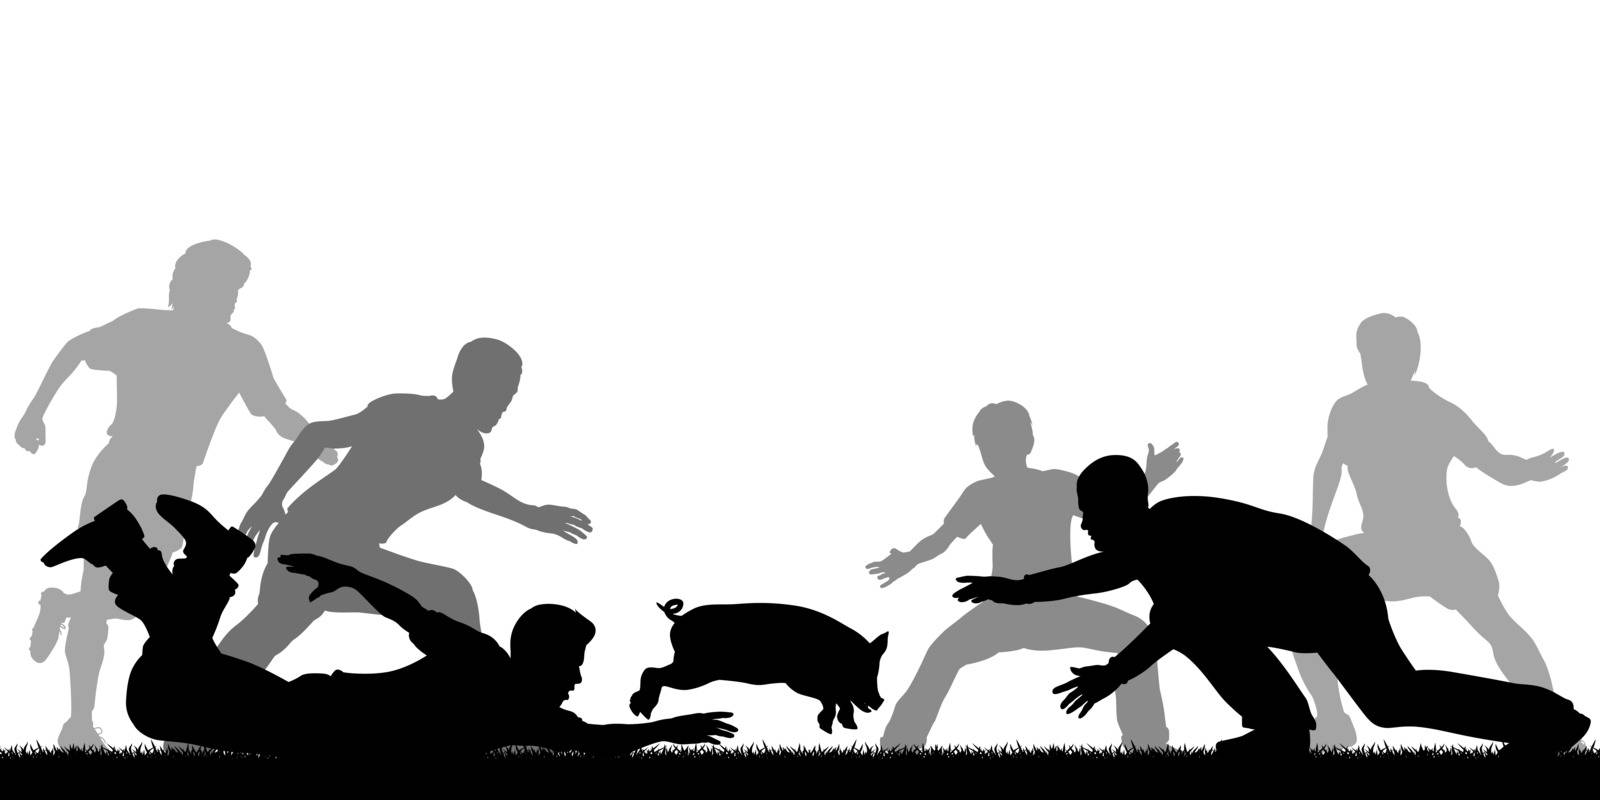 Editable vector illustration of people trying to catch a slippery greased piglet